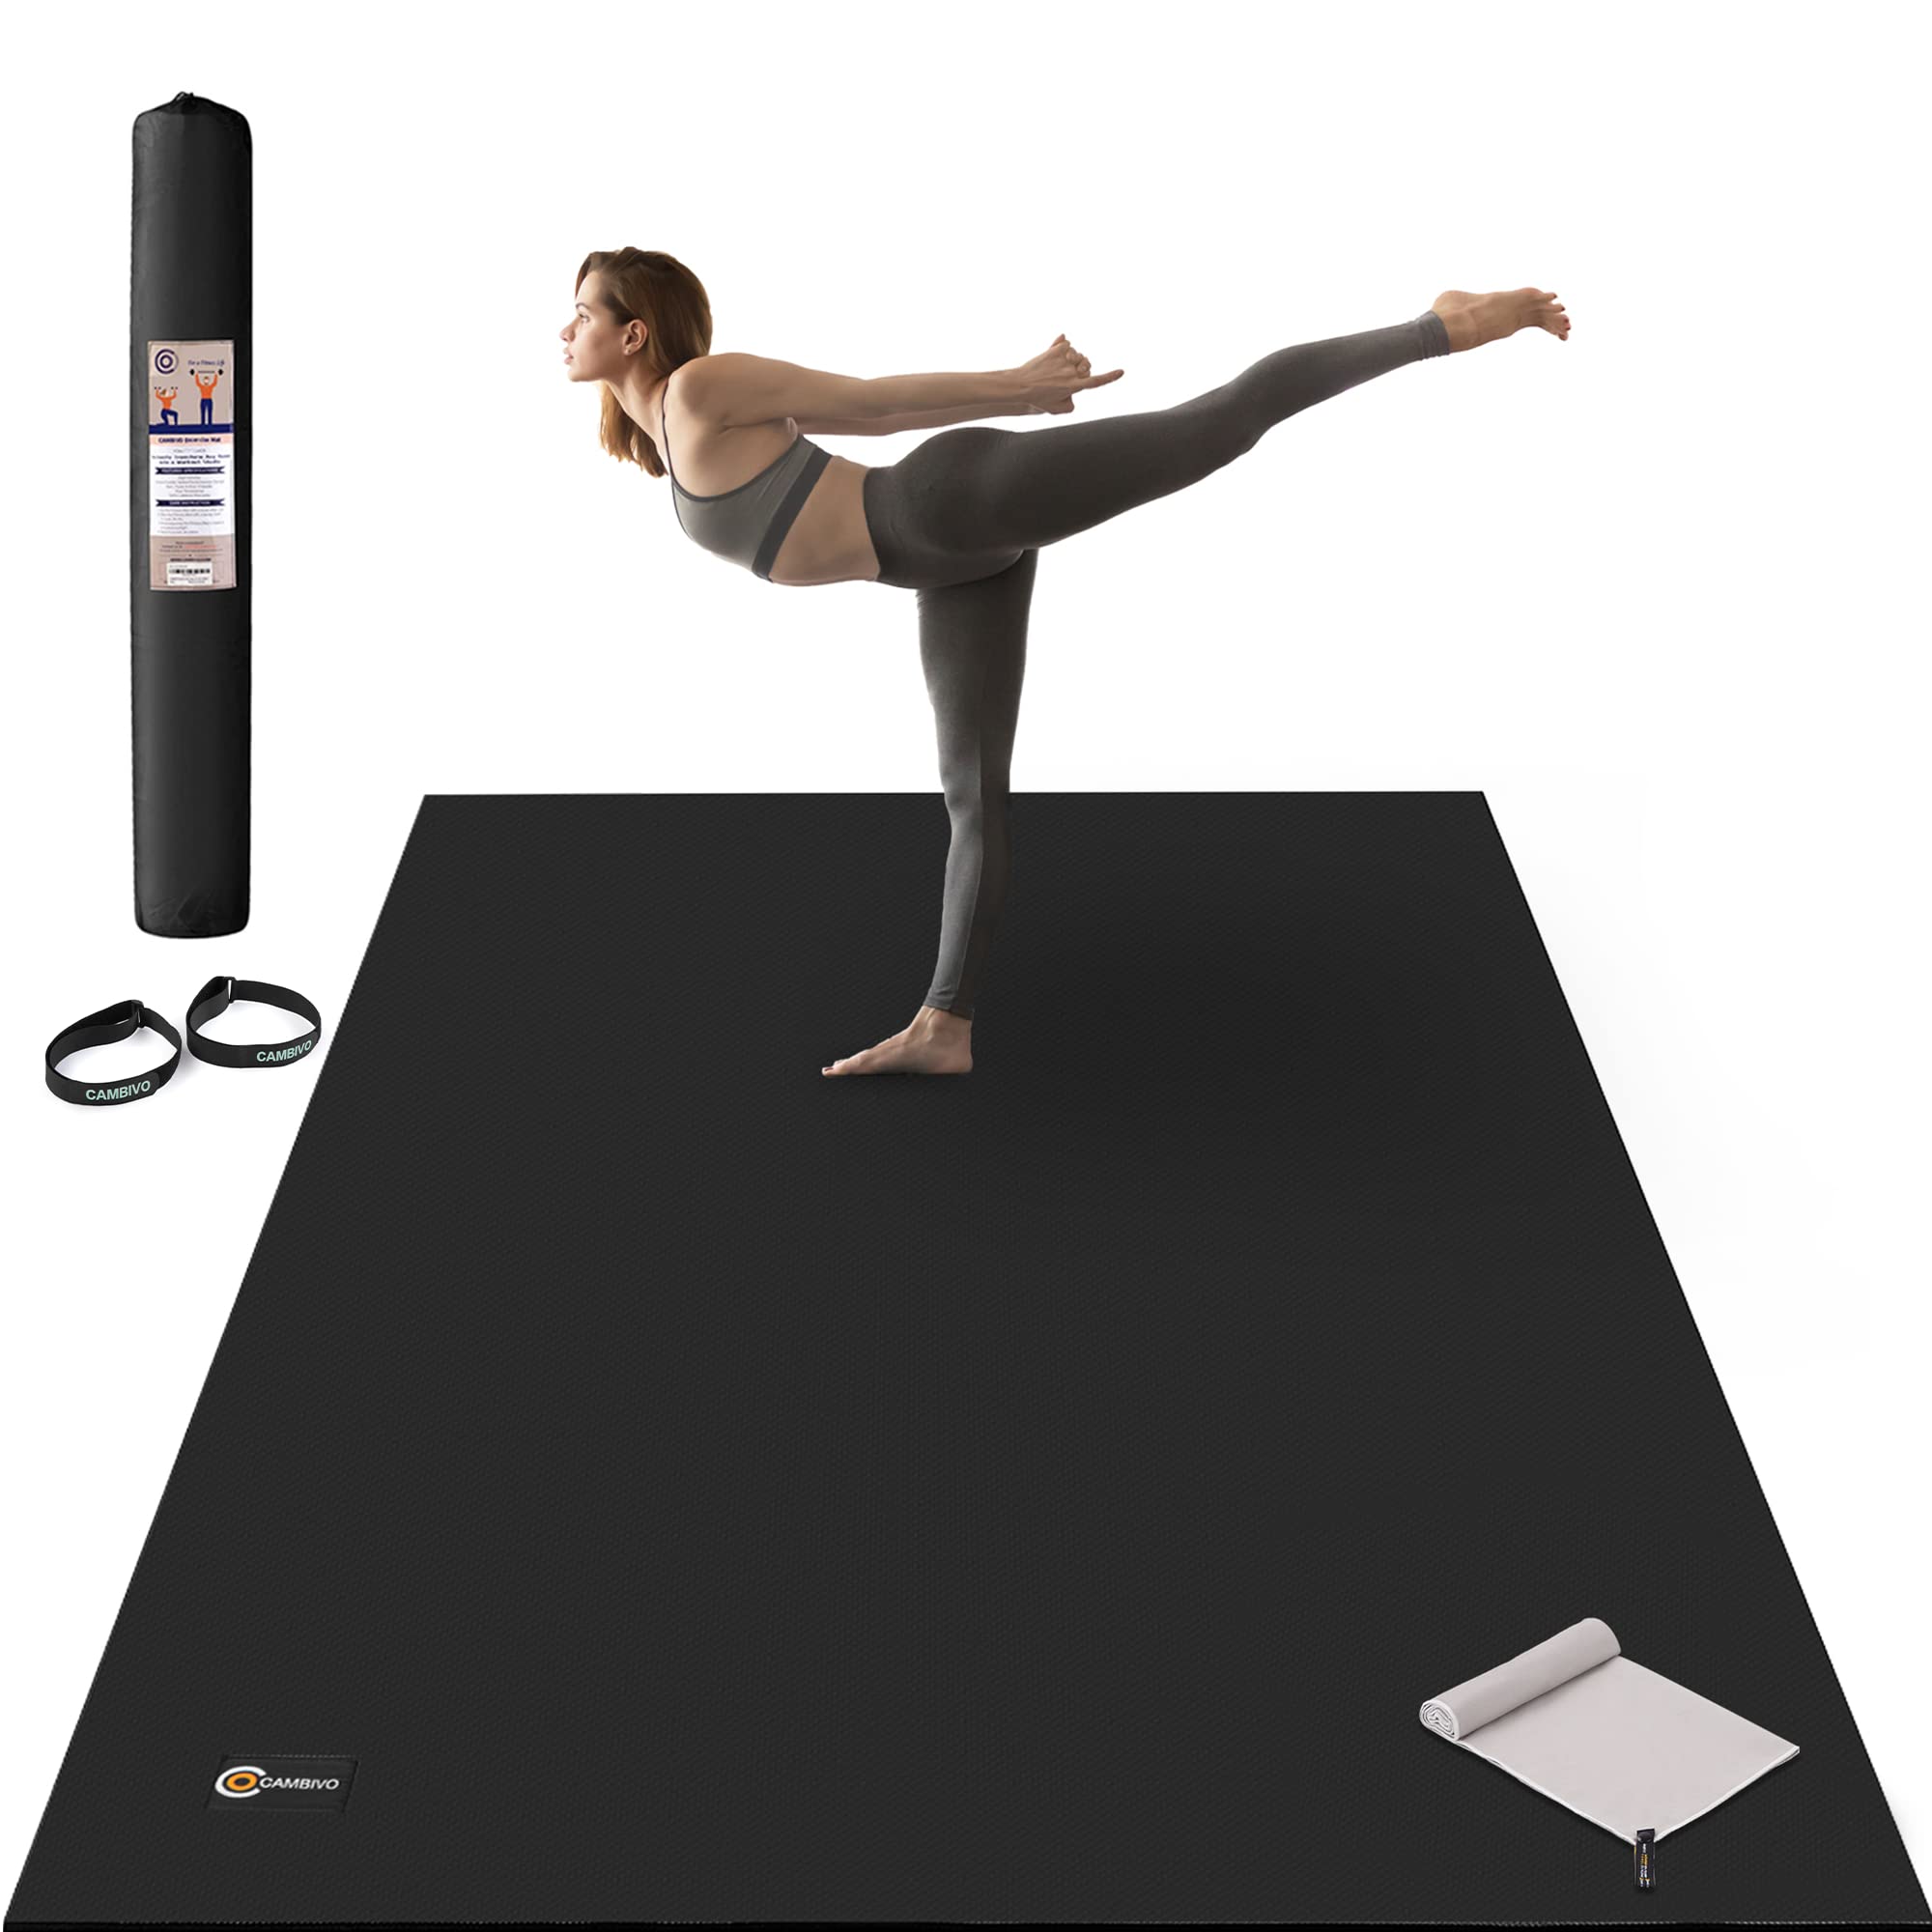 CAMBIVO Large Yoga Mat, Extra Thick Workout Mats for Home Gym, 6'x 4'x 8 mm Non Slip Wide Exercise Mat for Pilates, Stretching or Cardio, Use Without Shoes